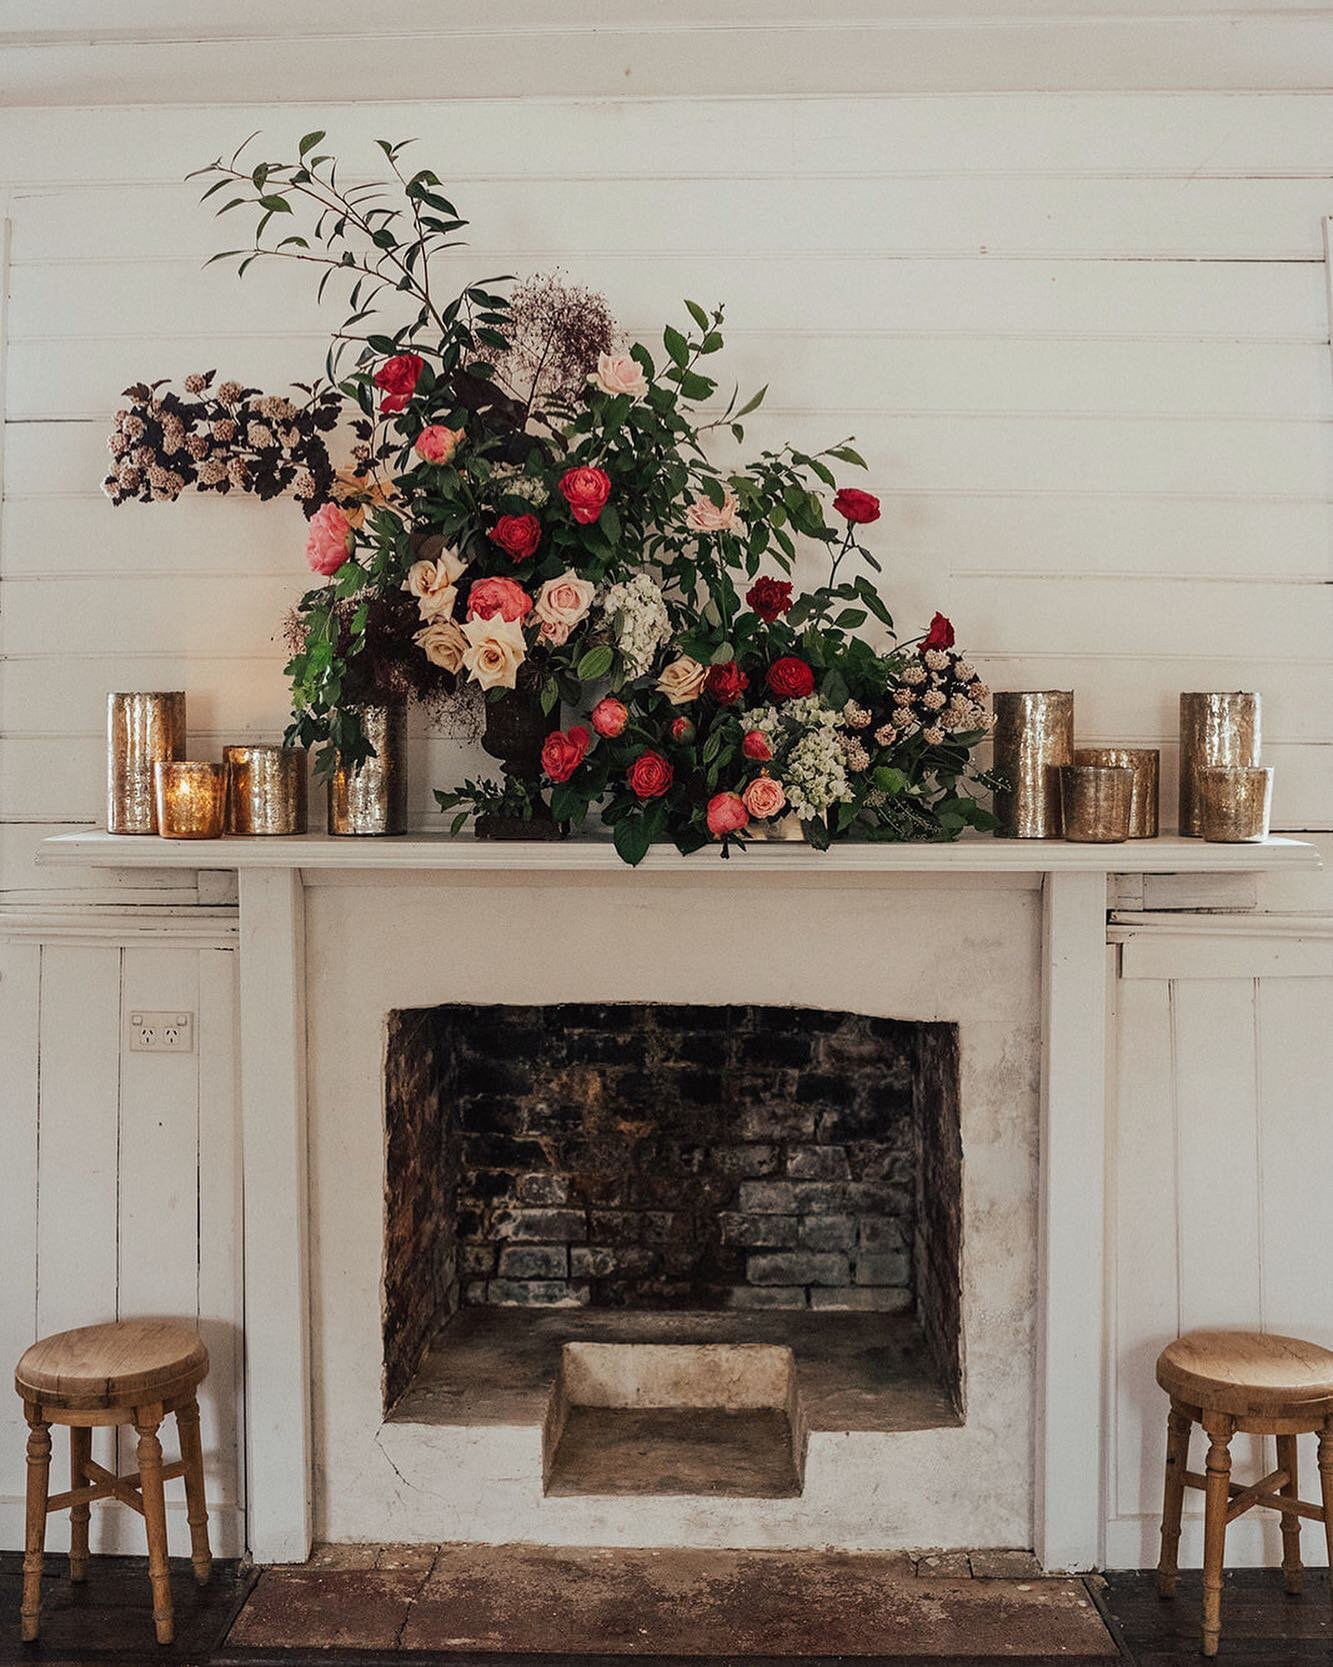 Romantic, flower filled spaces 🕯 for guests to relax in, between ceremony &amp; reception 🥂
⠀⠀⠀⠀⠀⠀⠀⠀⠀
⠀⠀⠀⠀⠀⠀⠀⠀⠀
Captured by @georgiaverrells